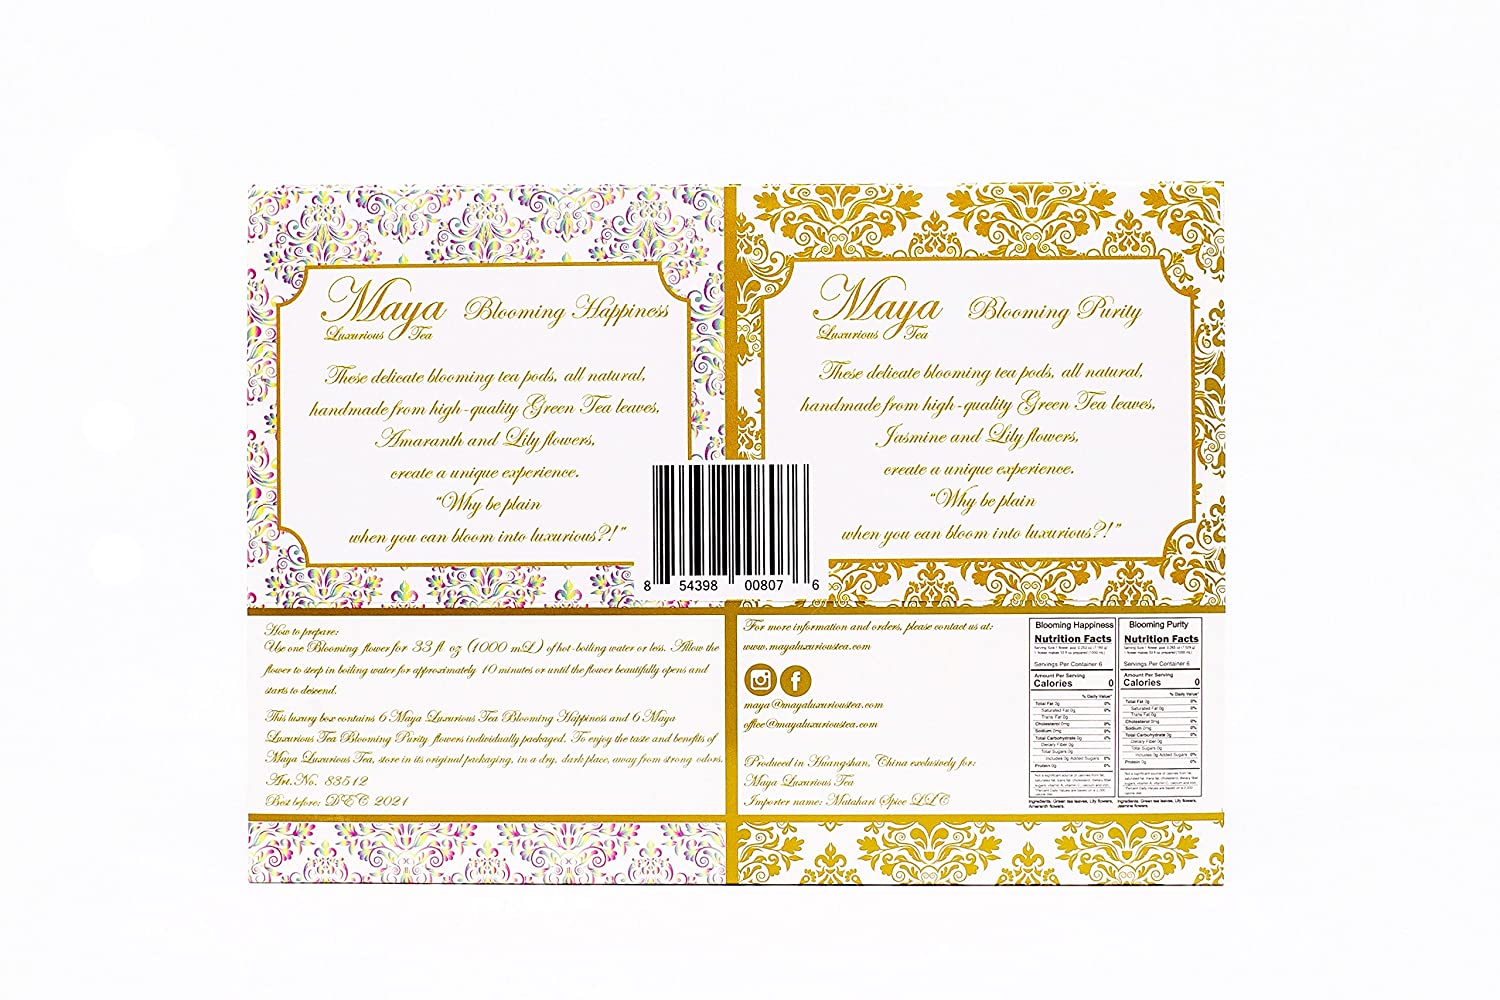 TEA Blooming Happiness & Purity, Pack of 12  by Maya Luxurious   OUT OF STOCK